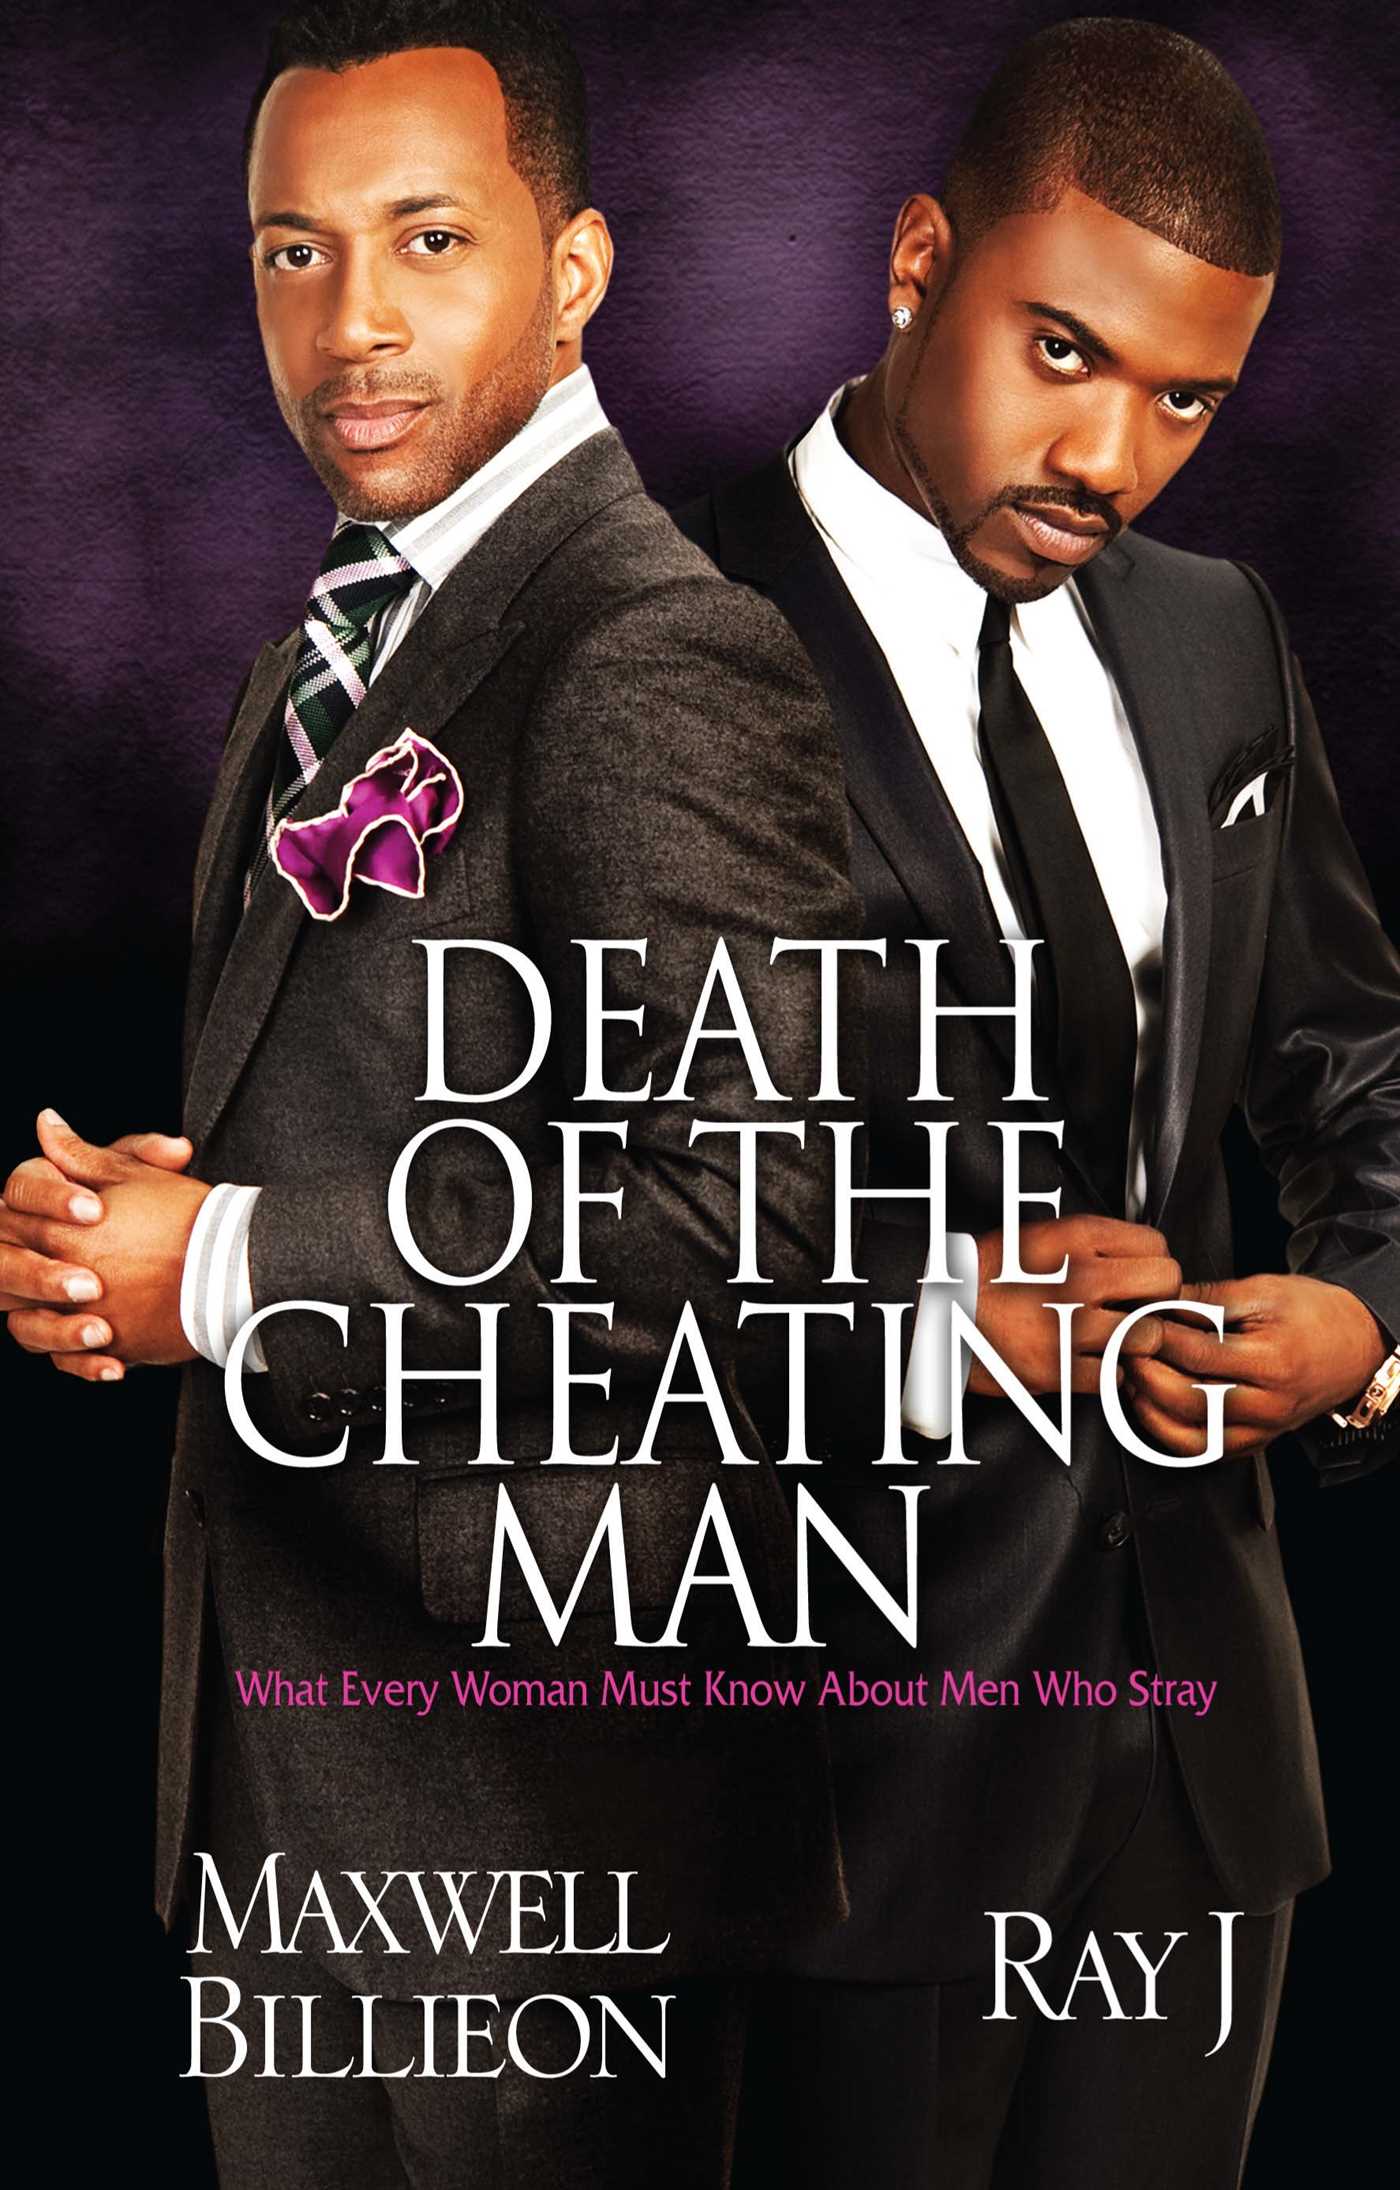 Death of the Cheating Man | Book by Maxwell Billieon, Ray J ...